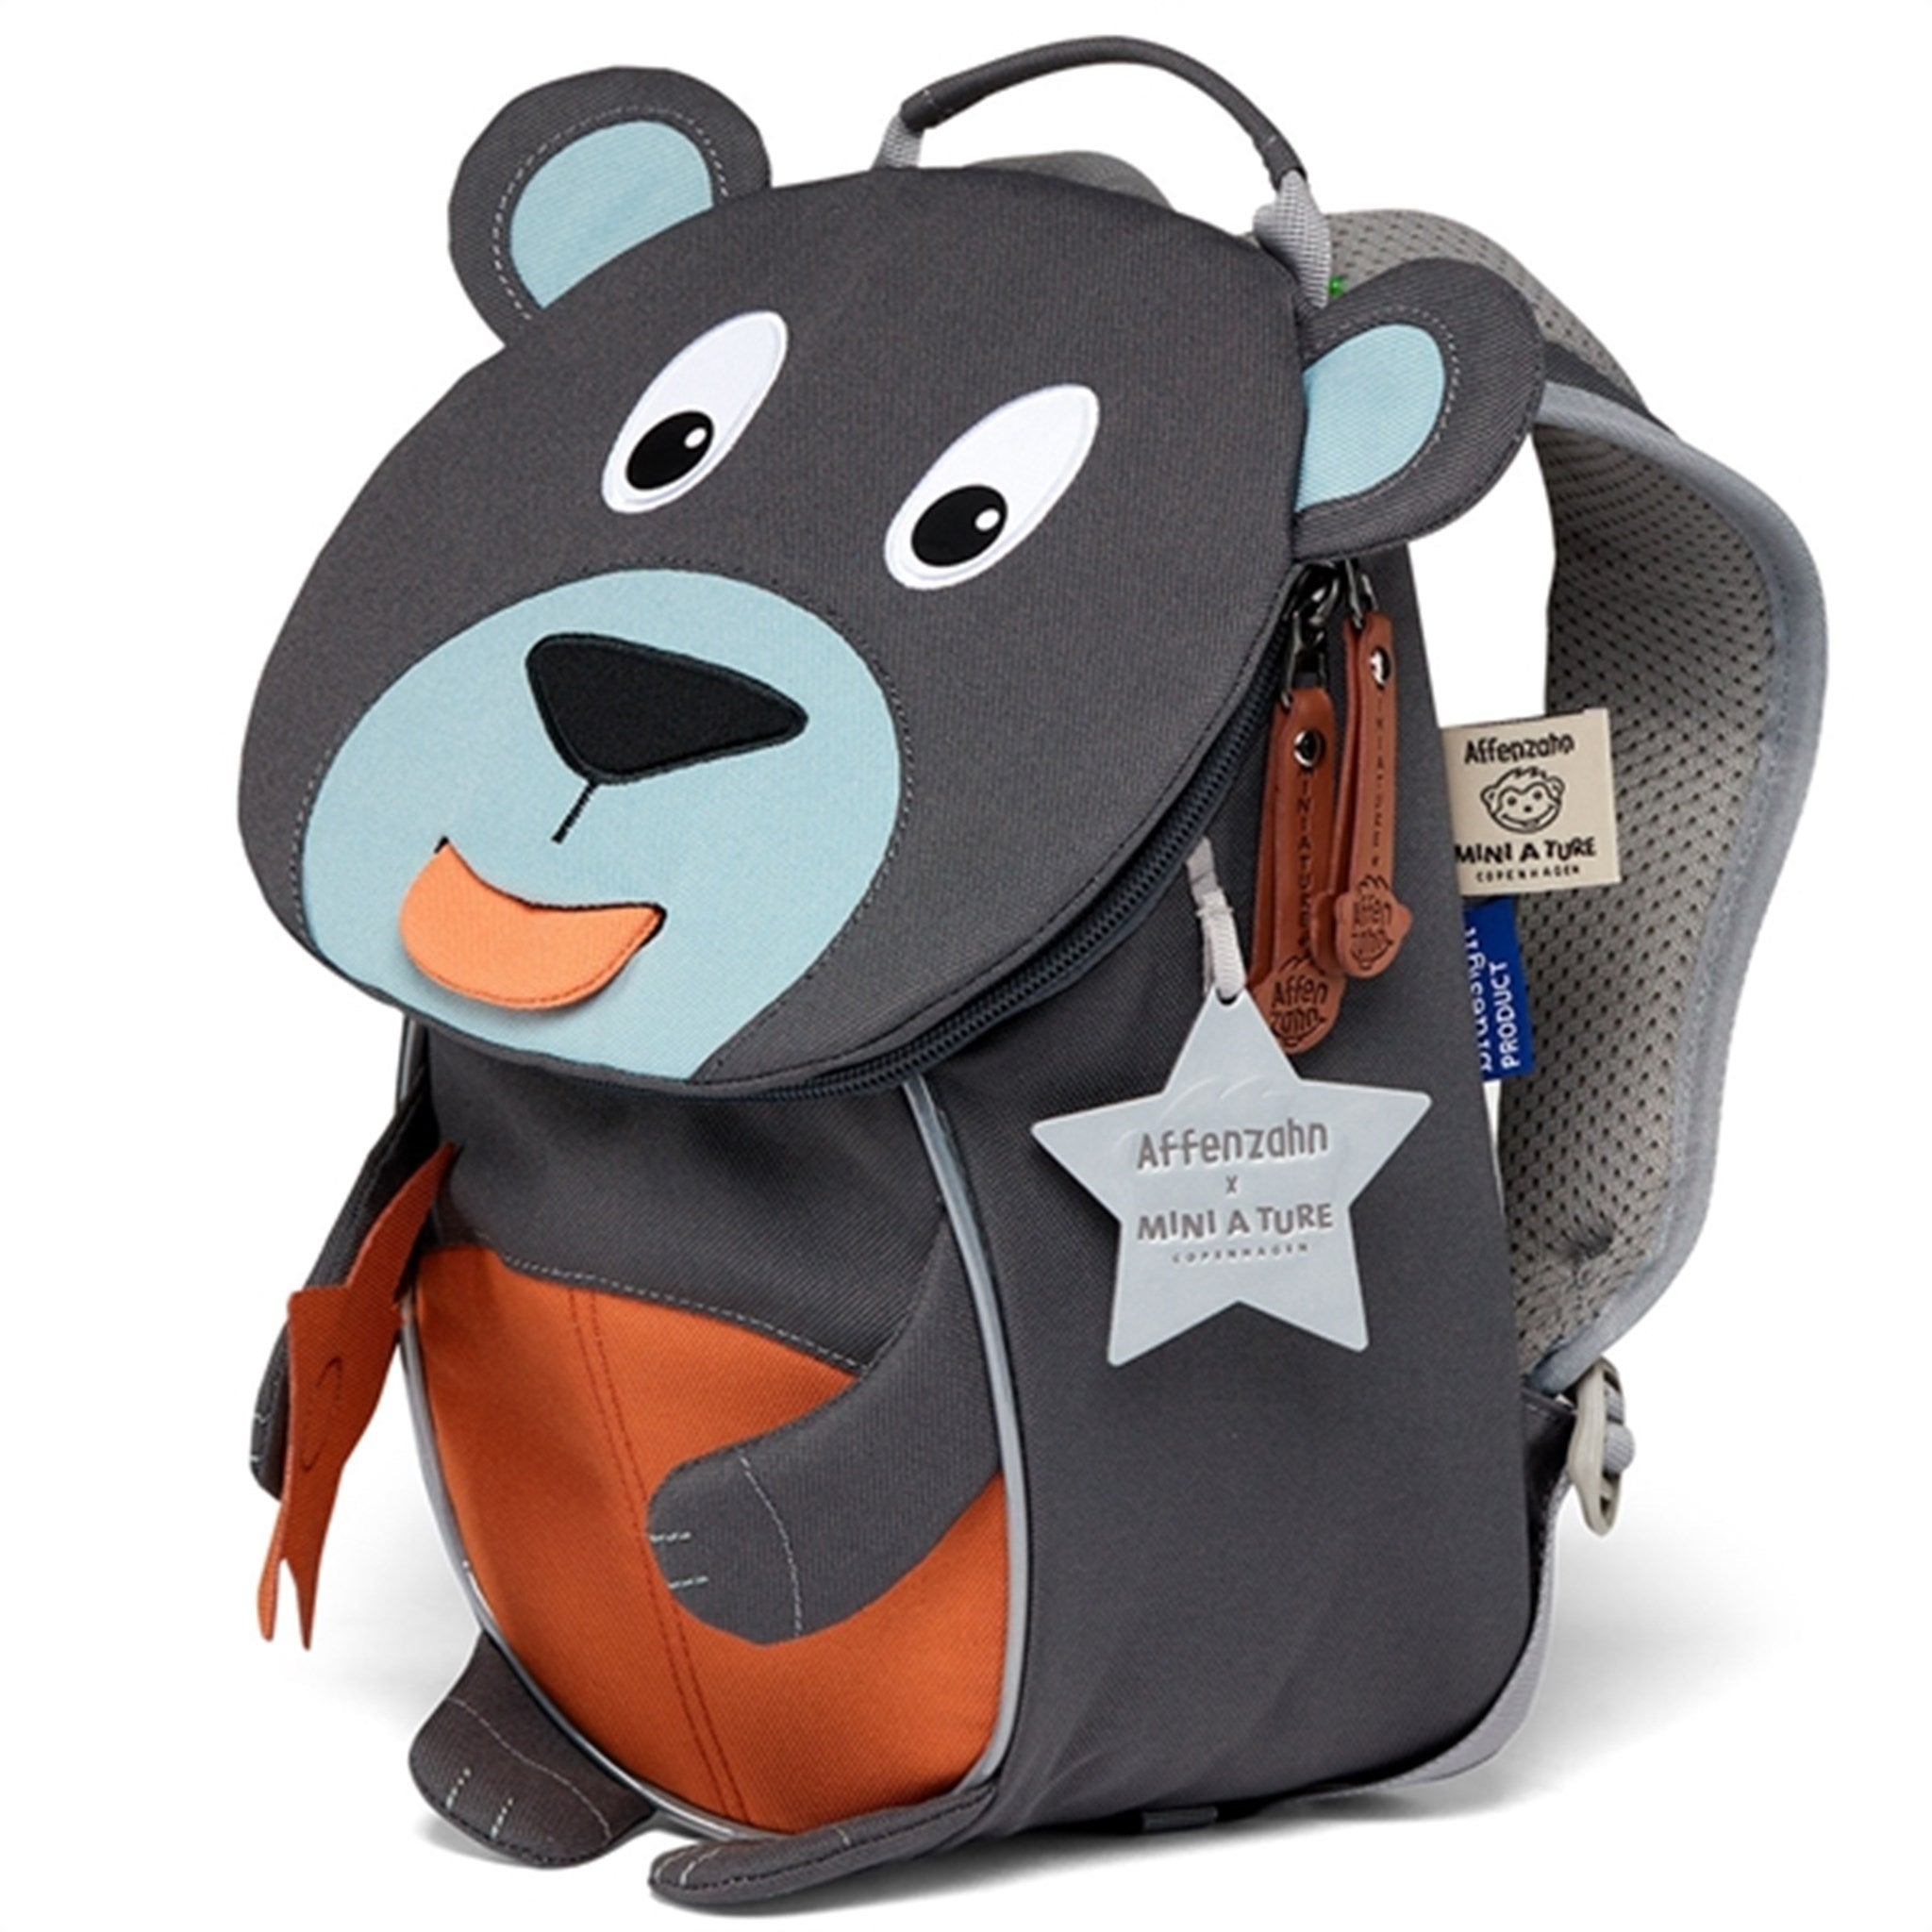 Affenzahn x MINI A TURE Day Care Backpack Small Friend Bear Forged Iron Blue 2